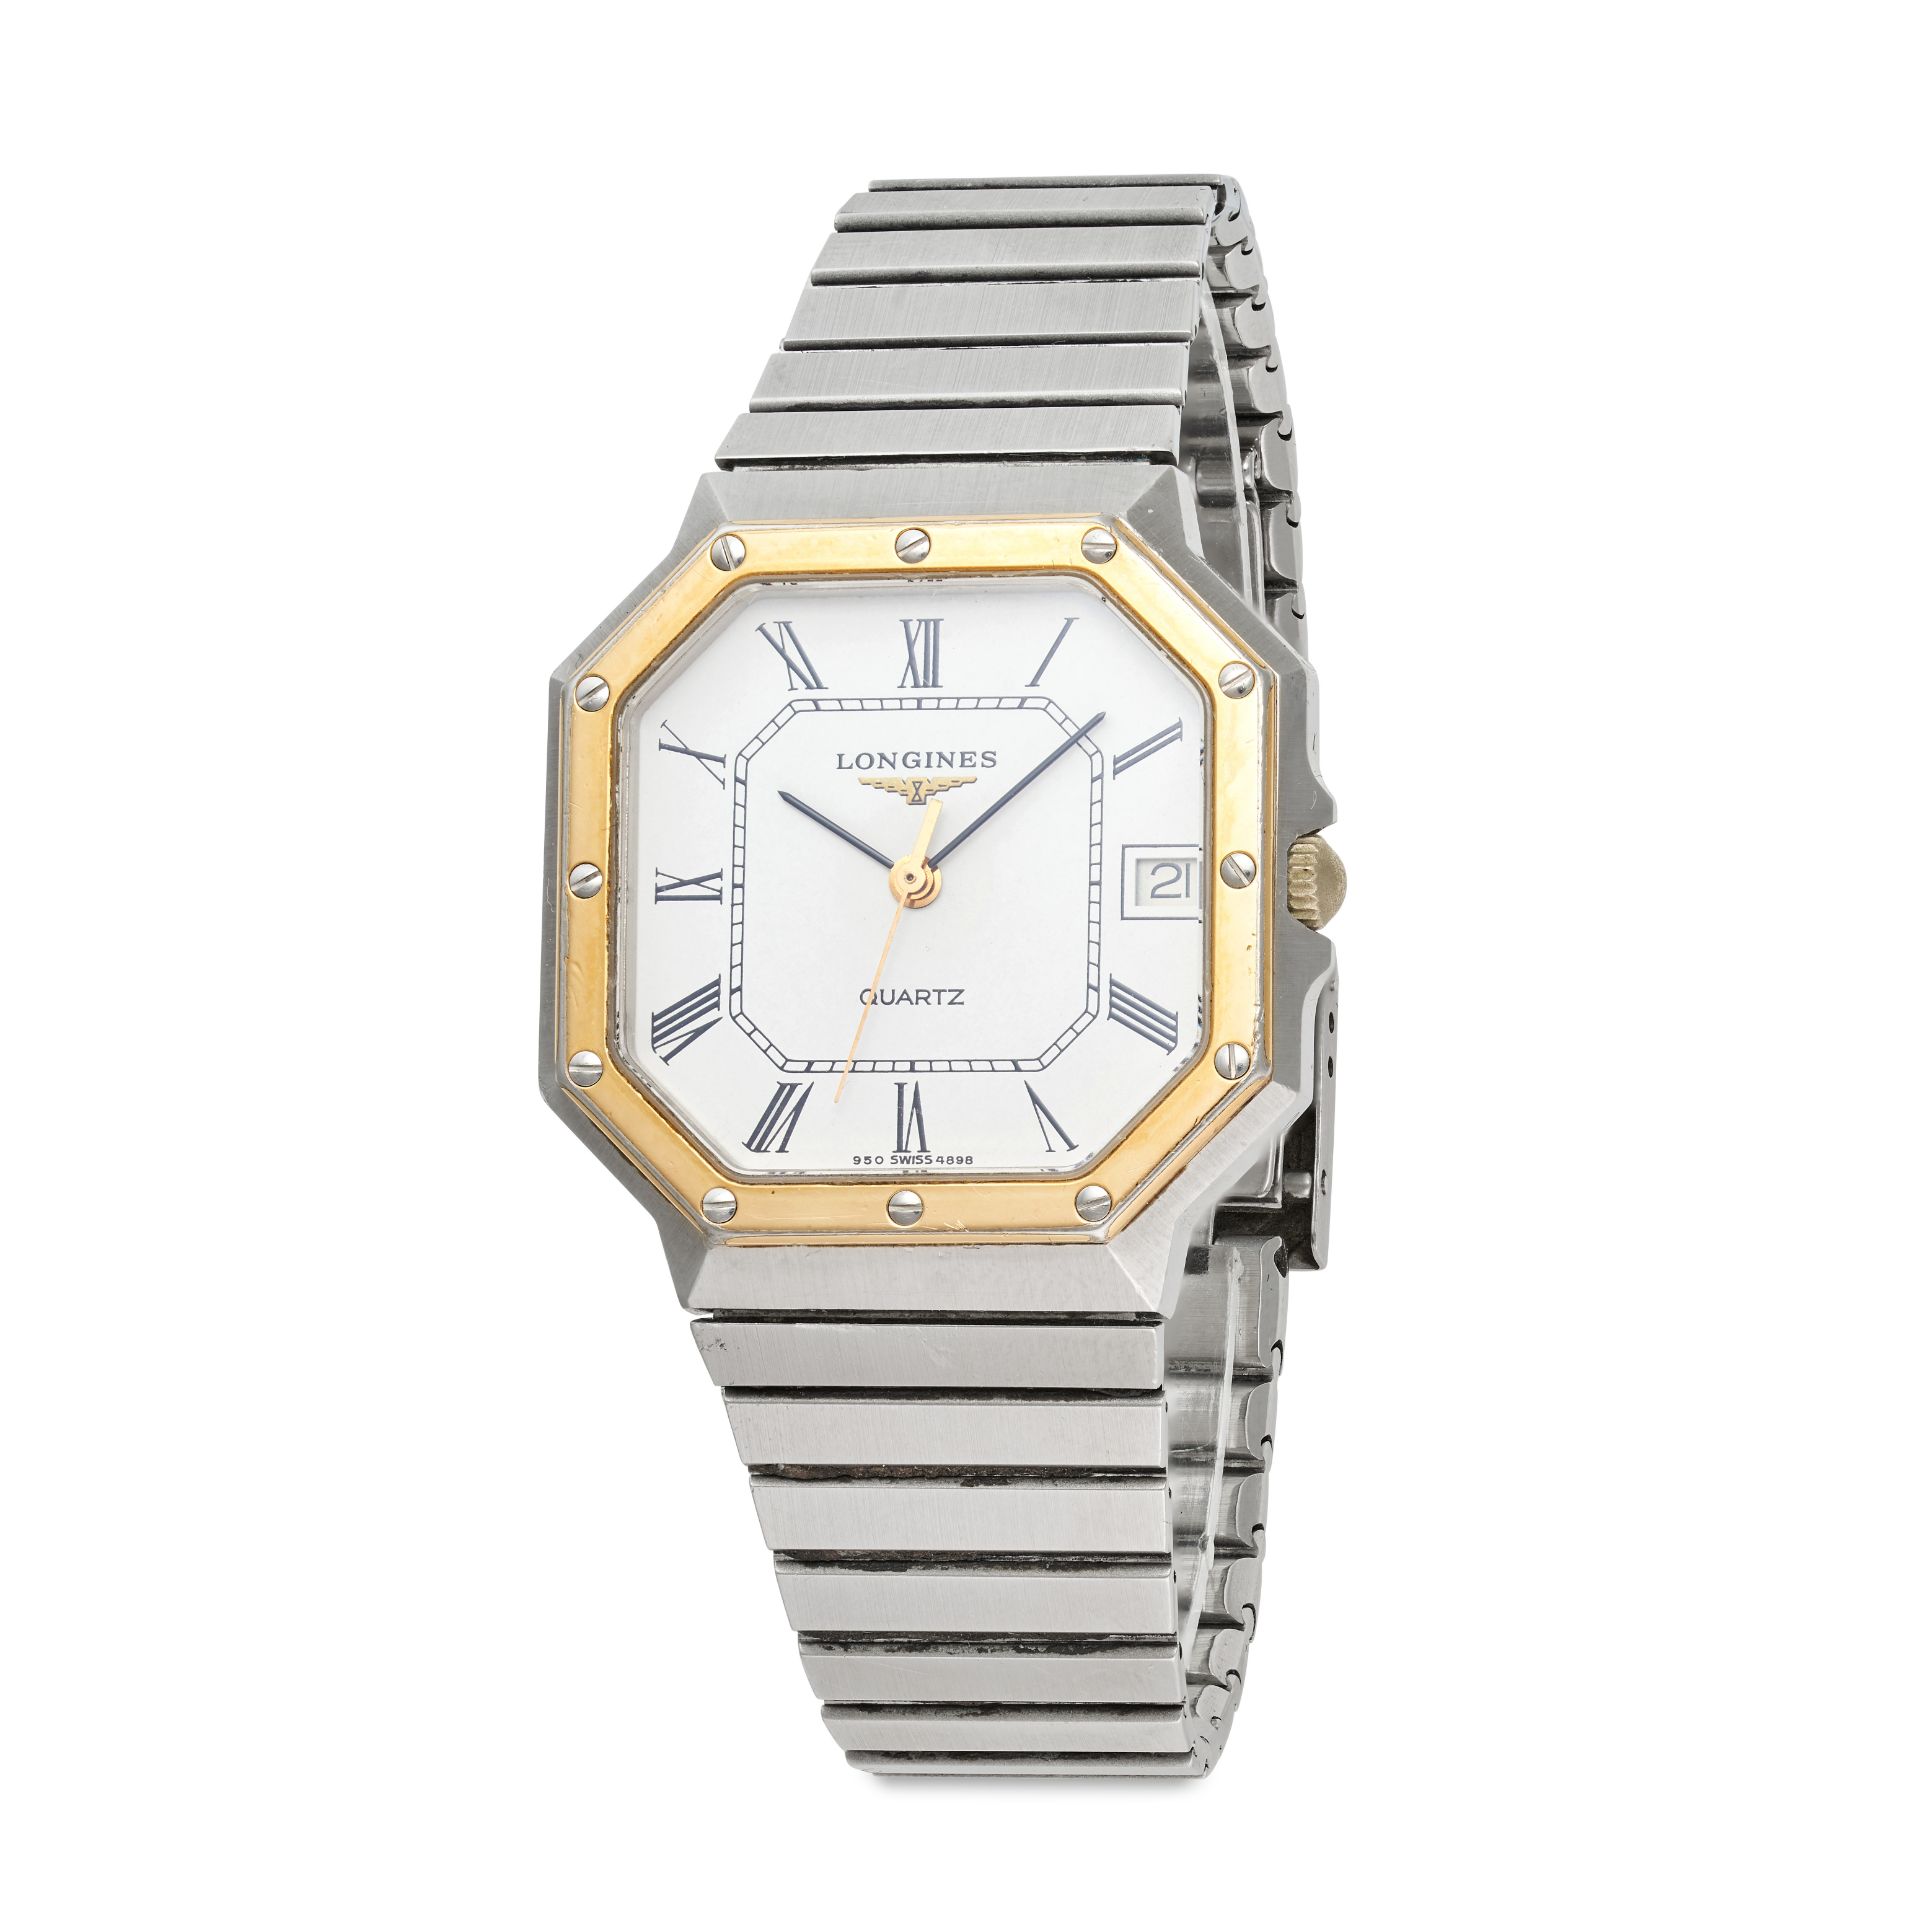 LONGINES, A VINTAGE WRISTWATCH in stainless steel, the octagonal screw down bezel surrounding a w...